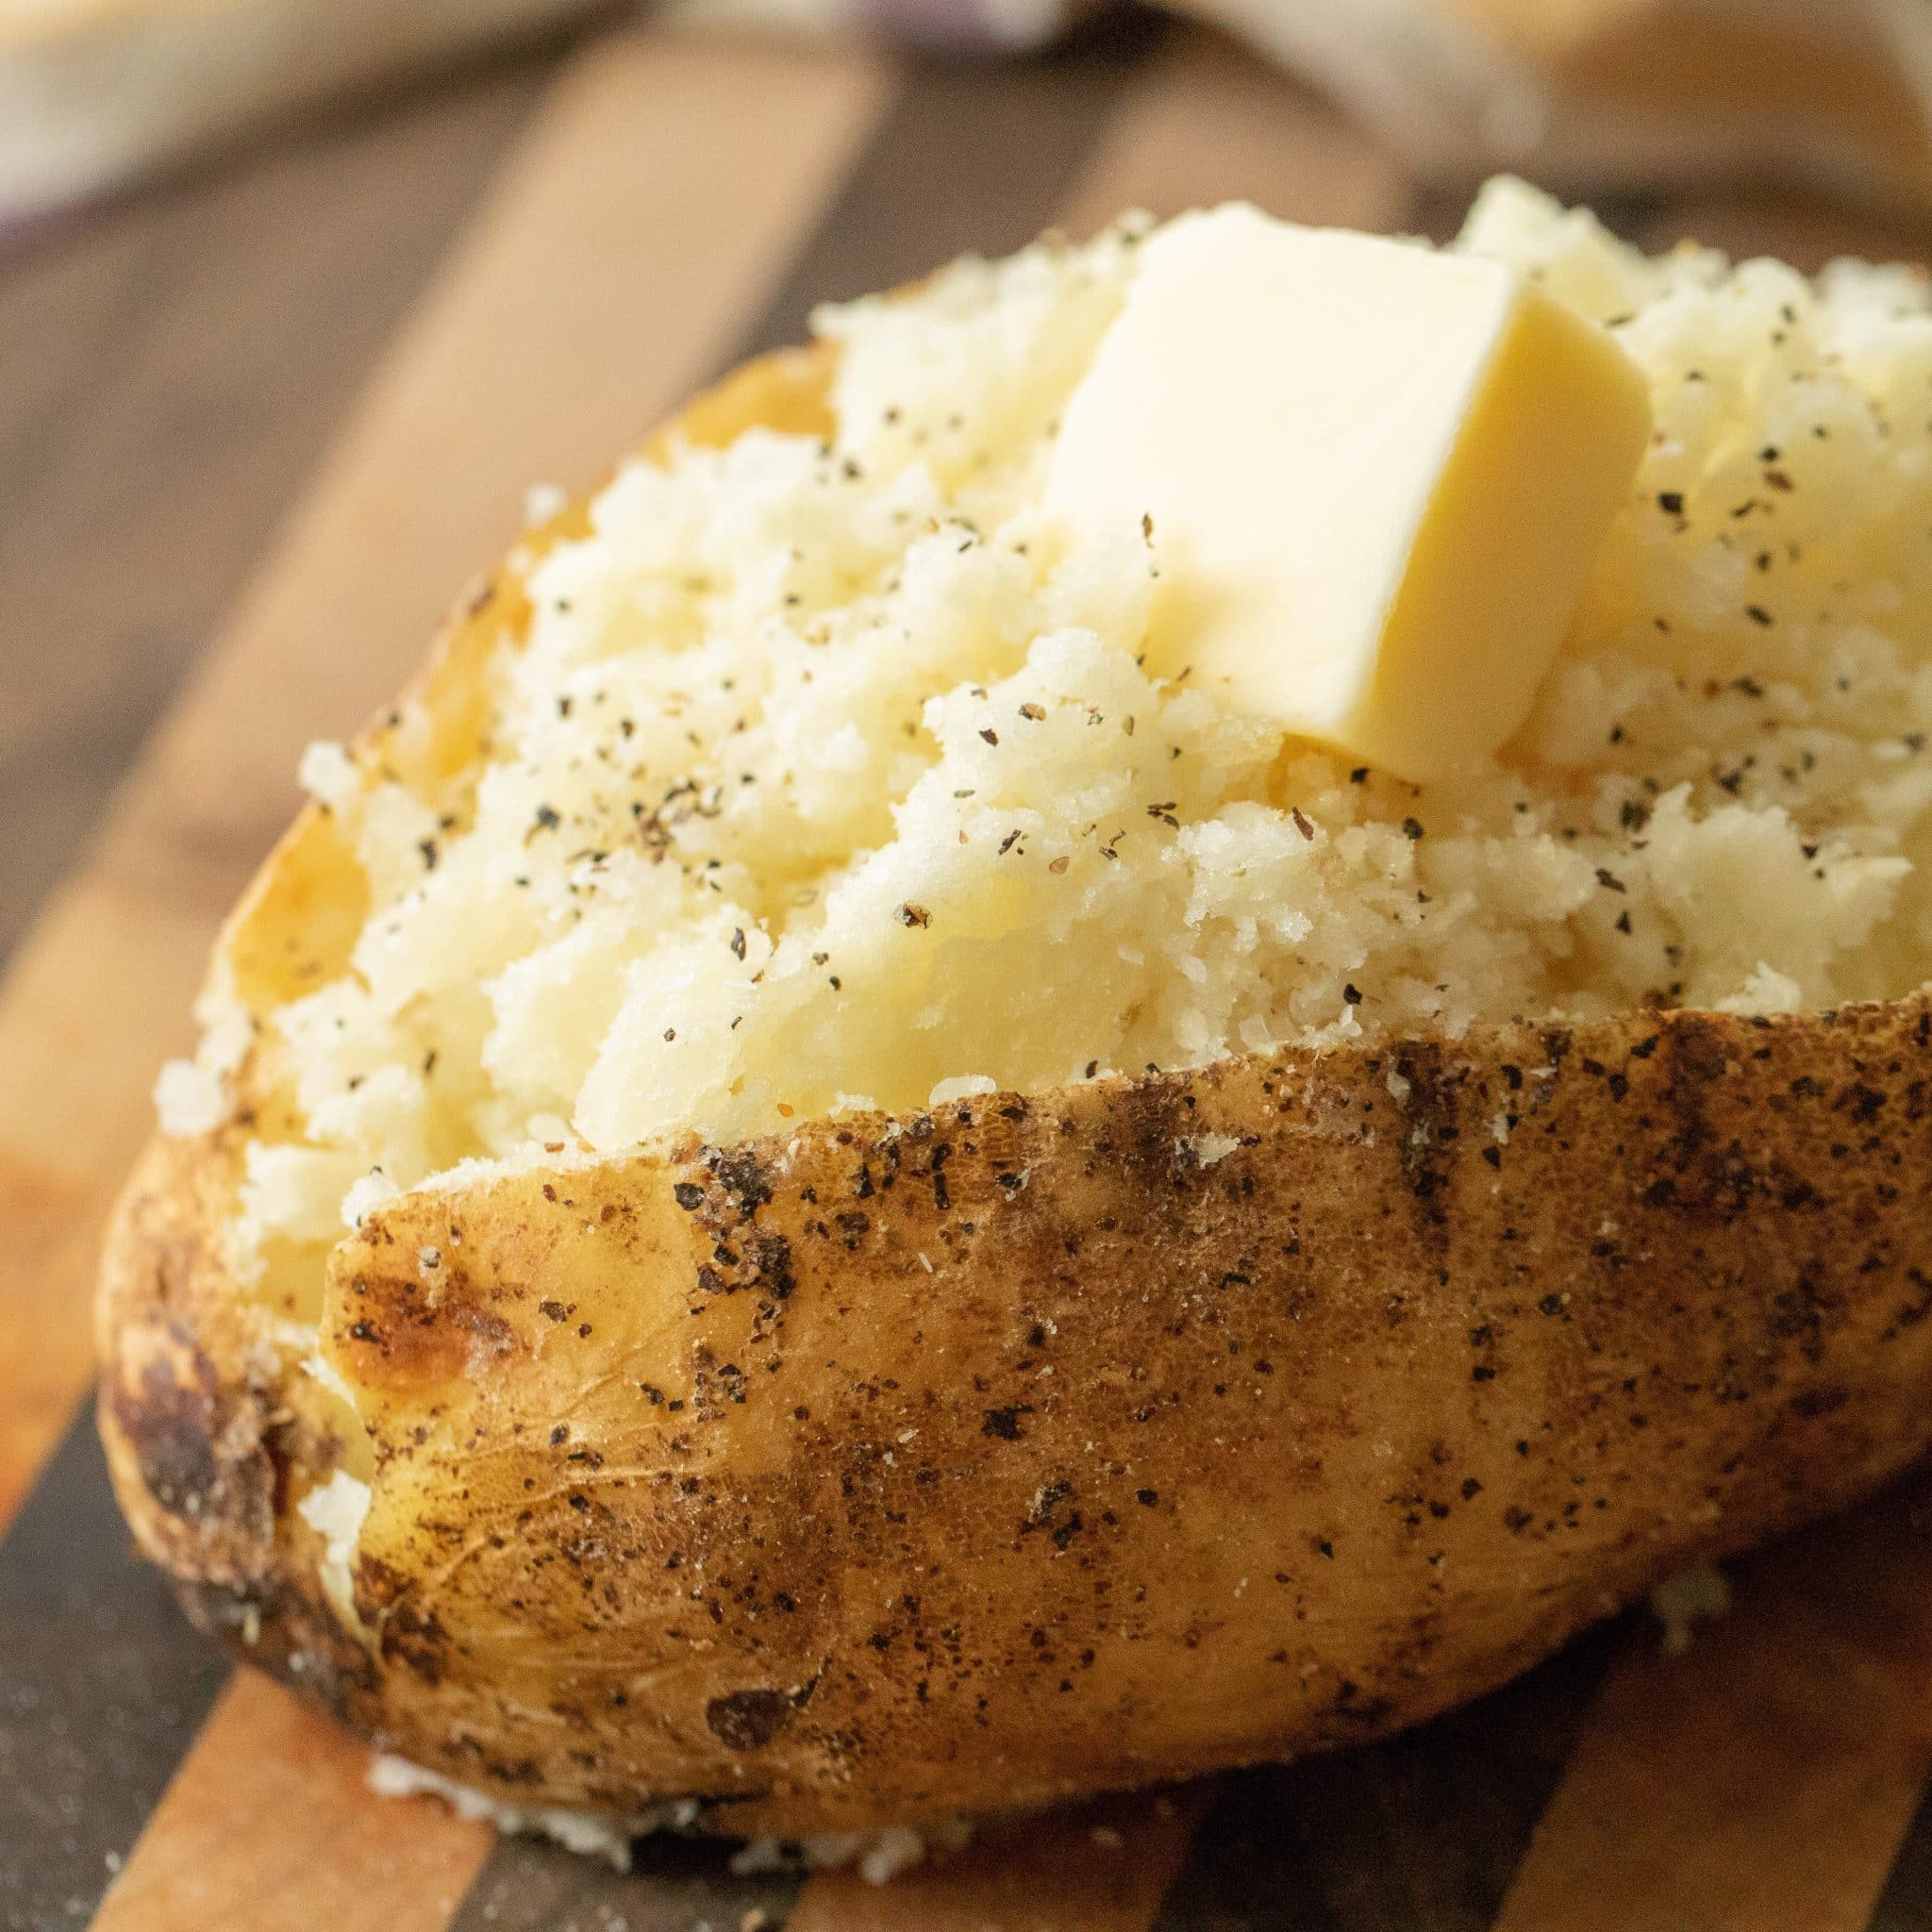 sliced whole baked potato with cube of butter on the top of the potato